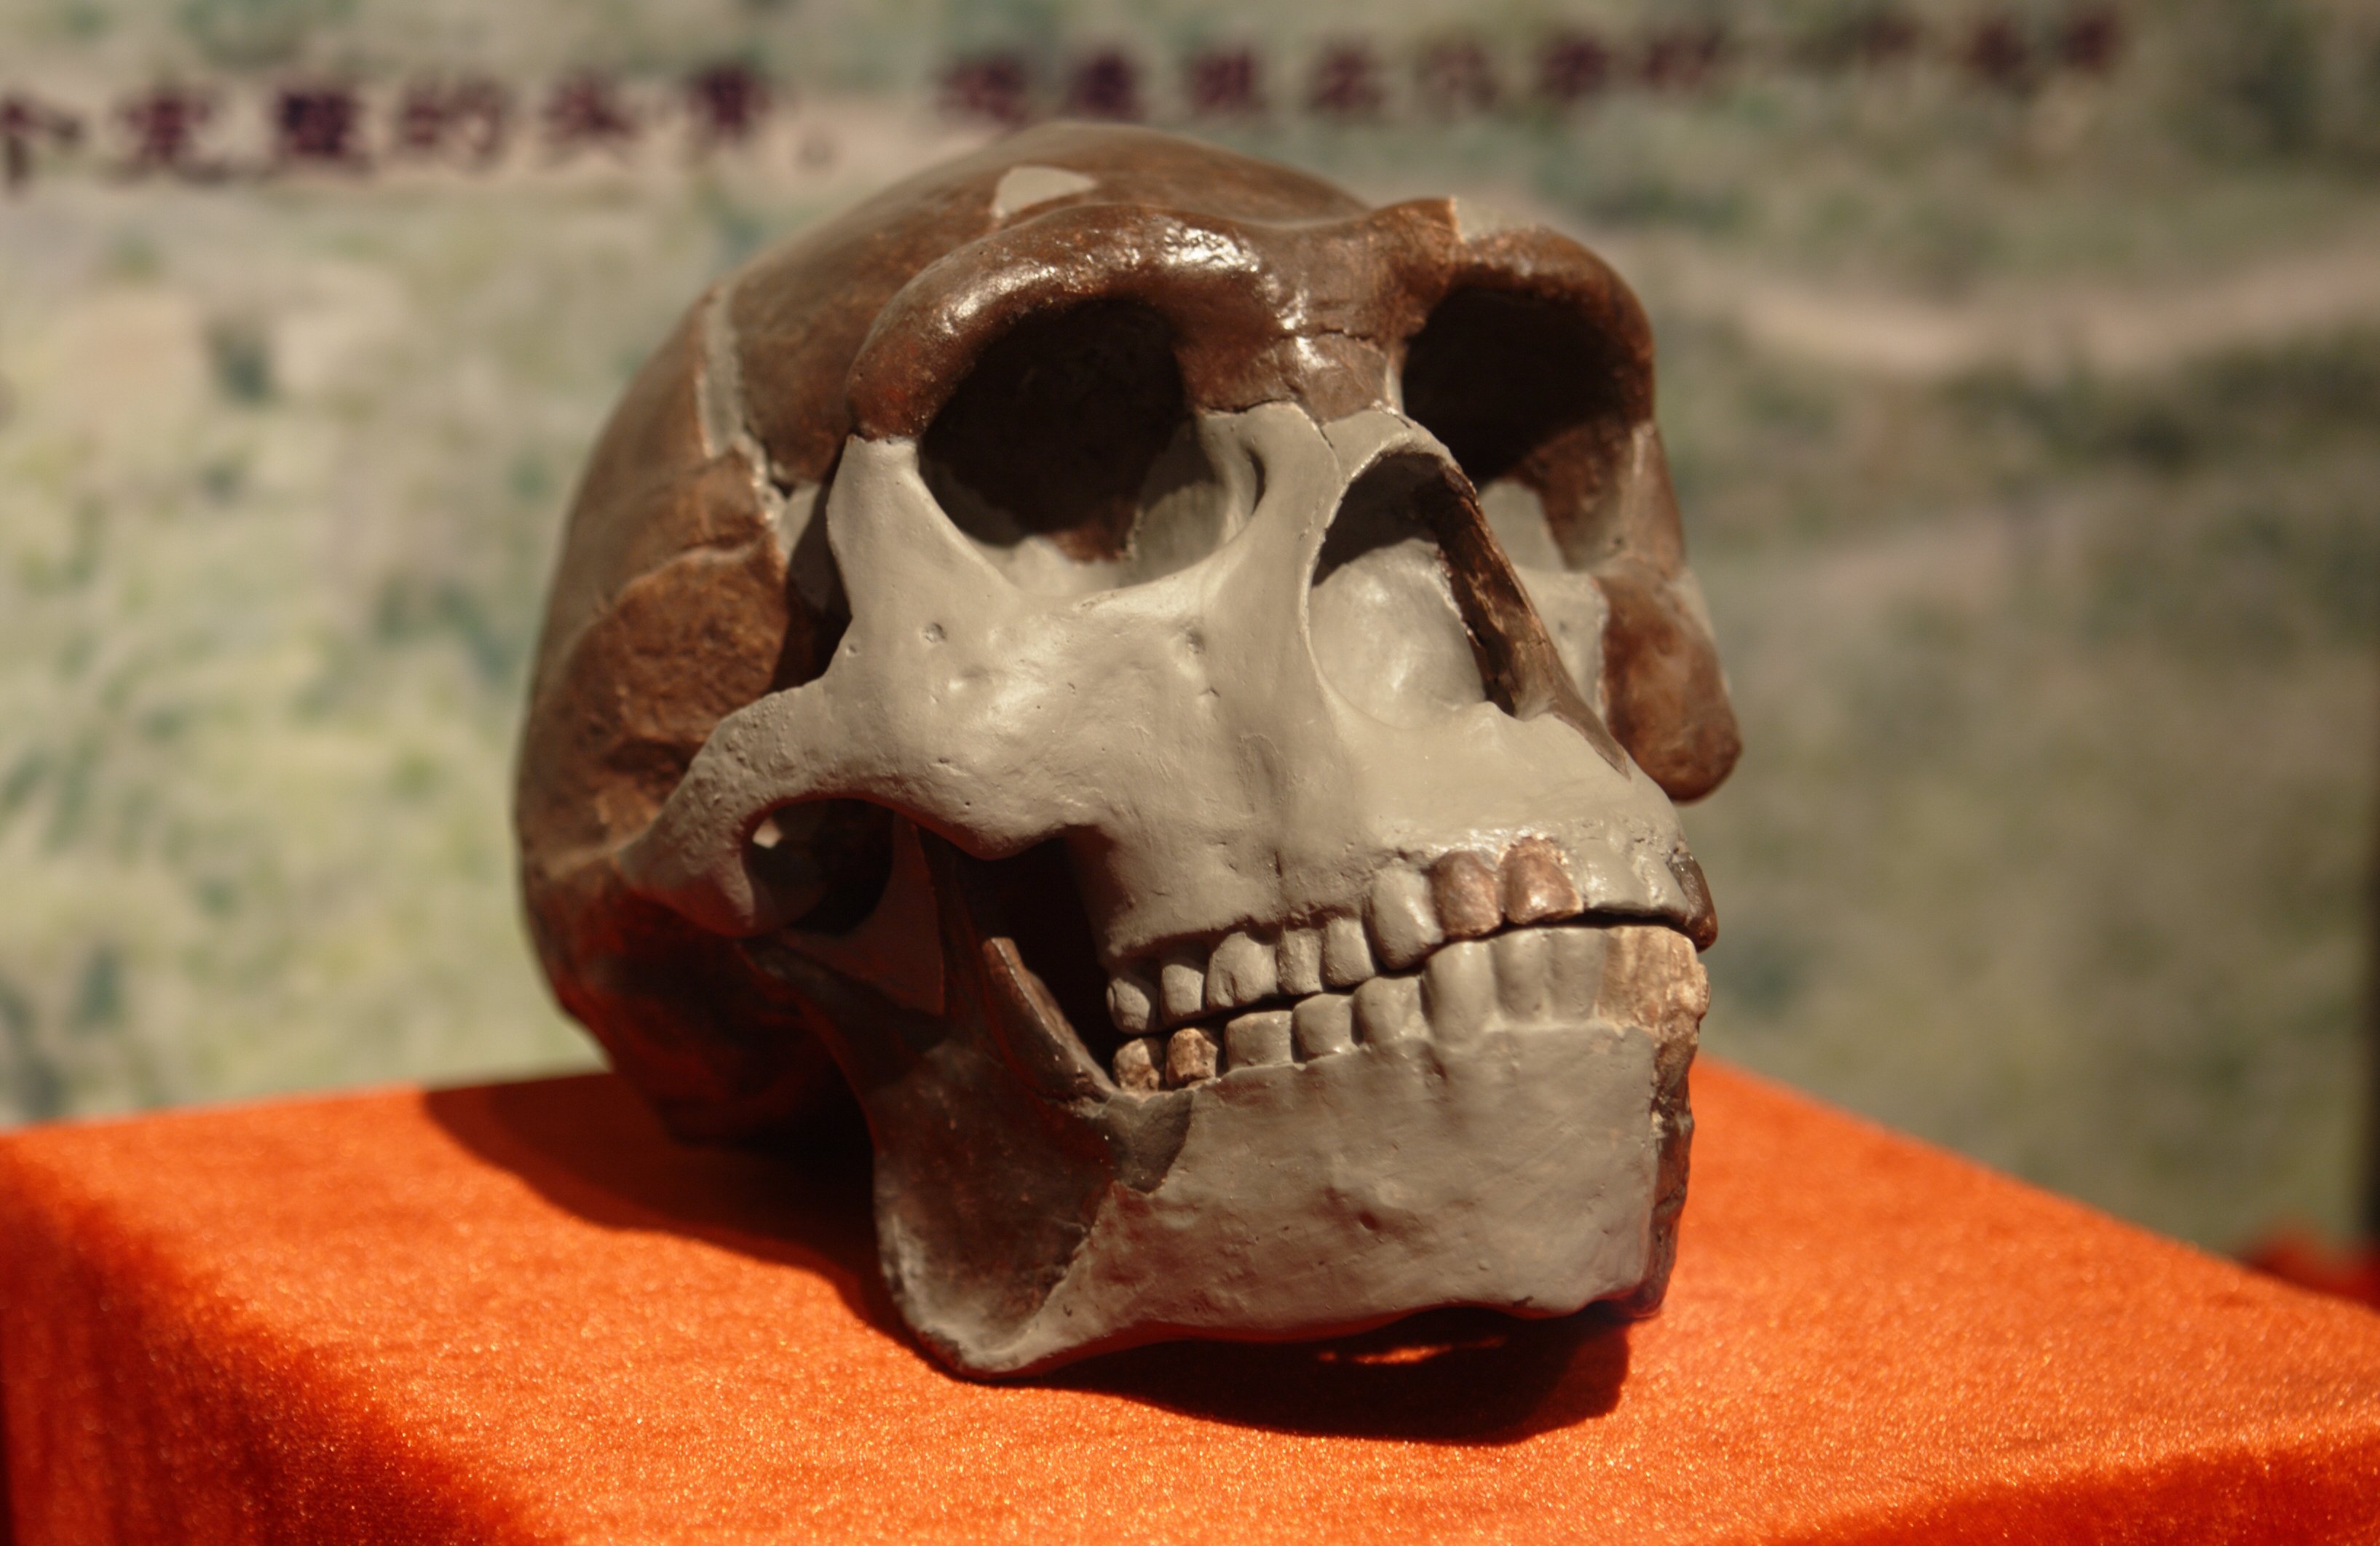 Skull of the Peking man. Fossils found near Xuchang in northern China are thought to fill a missing link between the Peking man and modern Chinese. Photo: Wikipedia